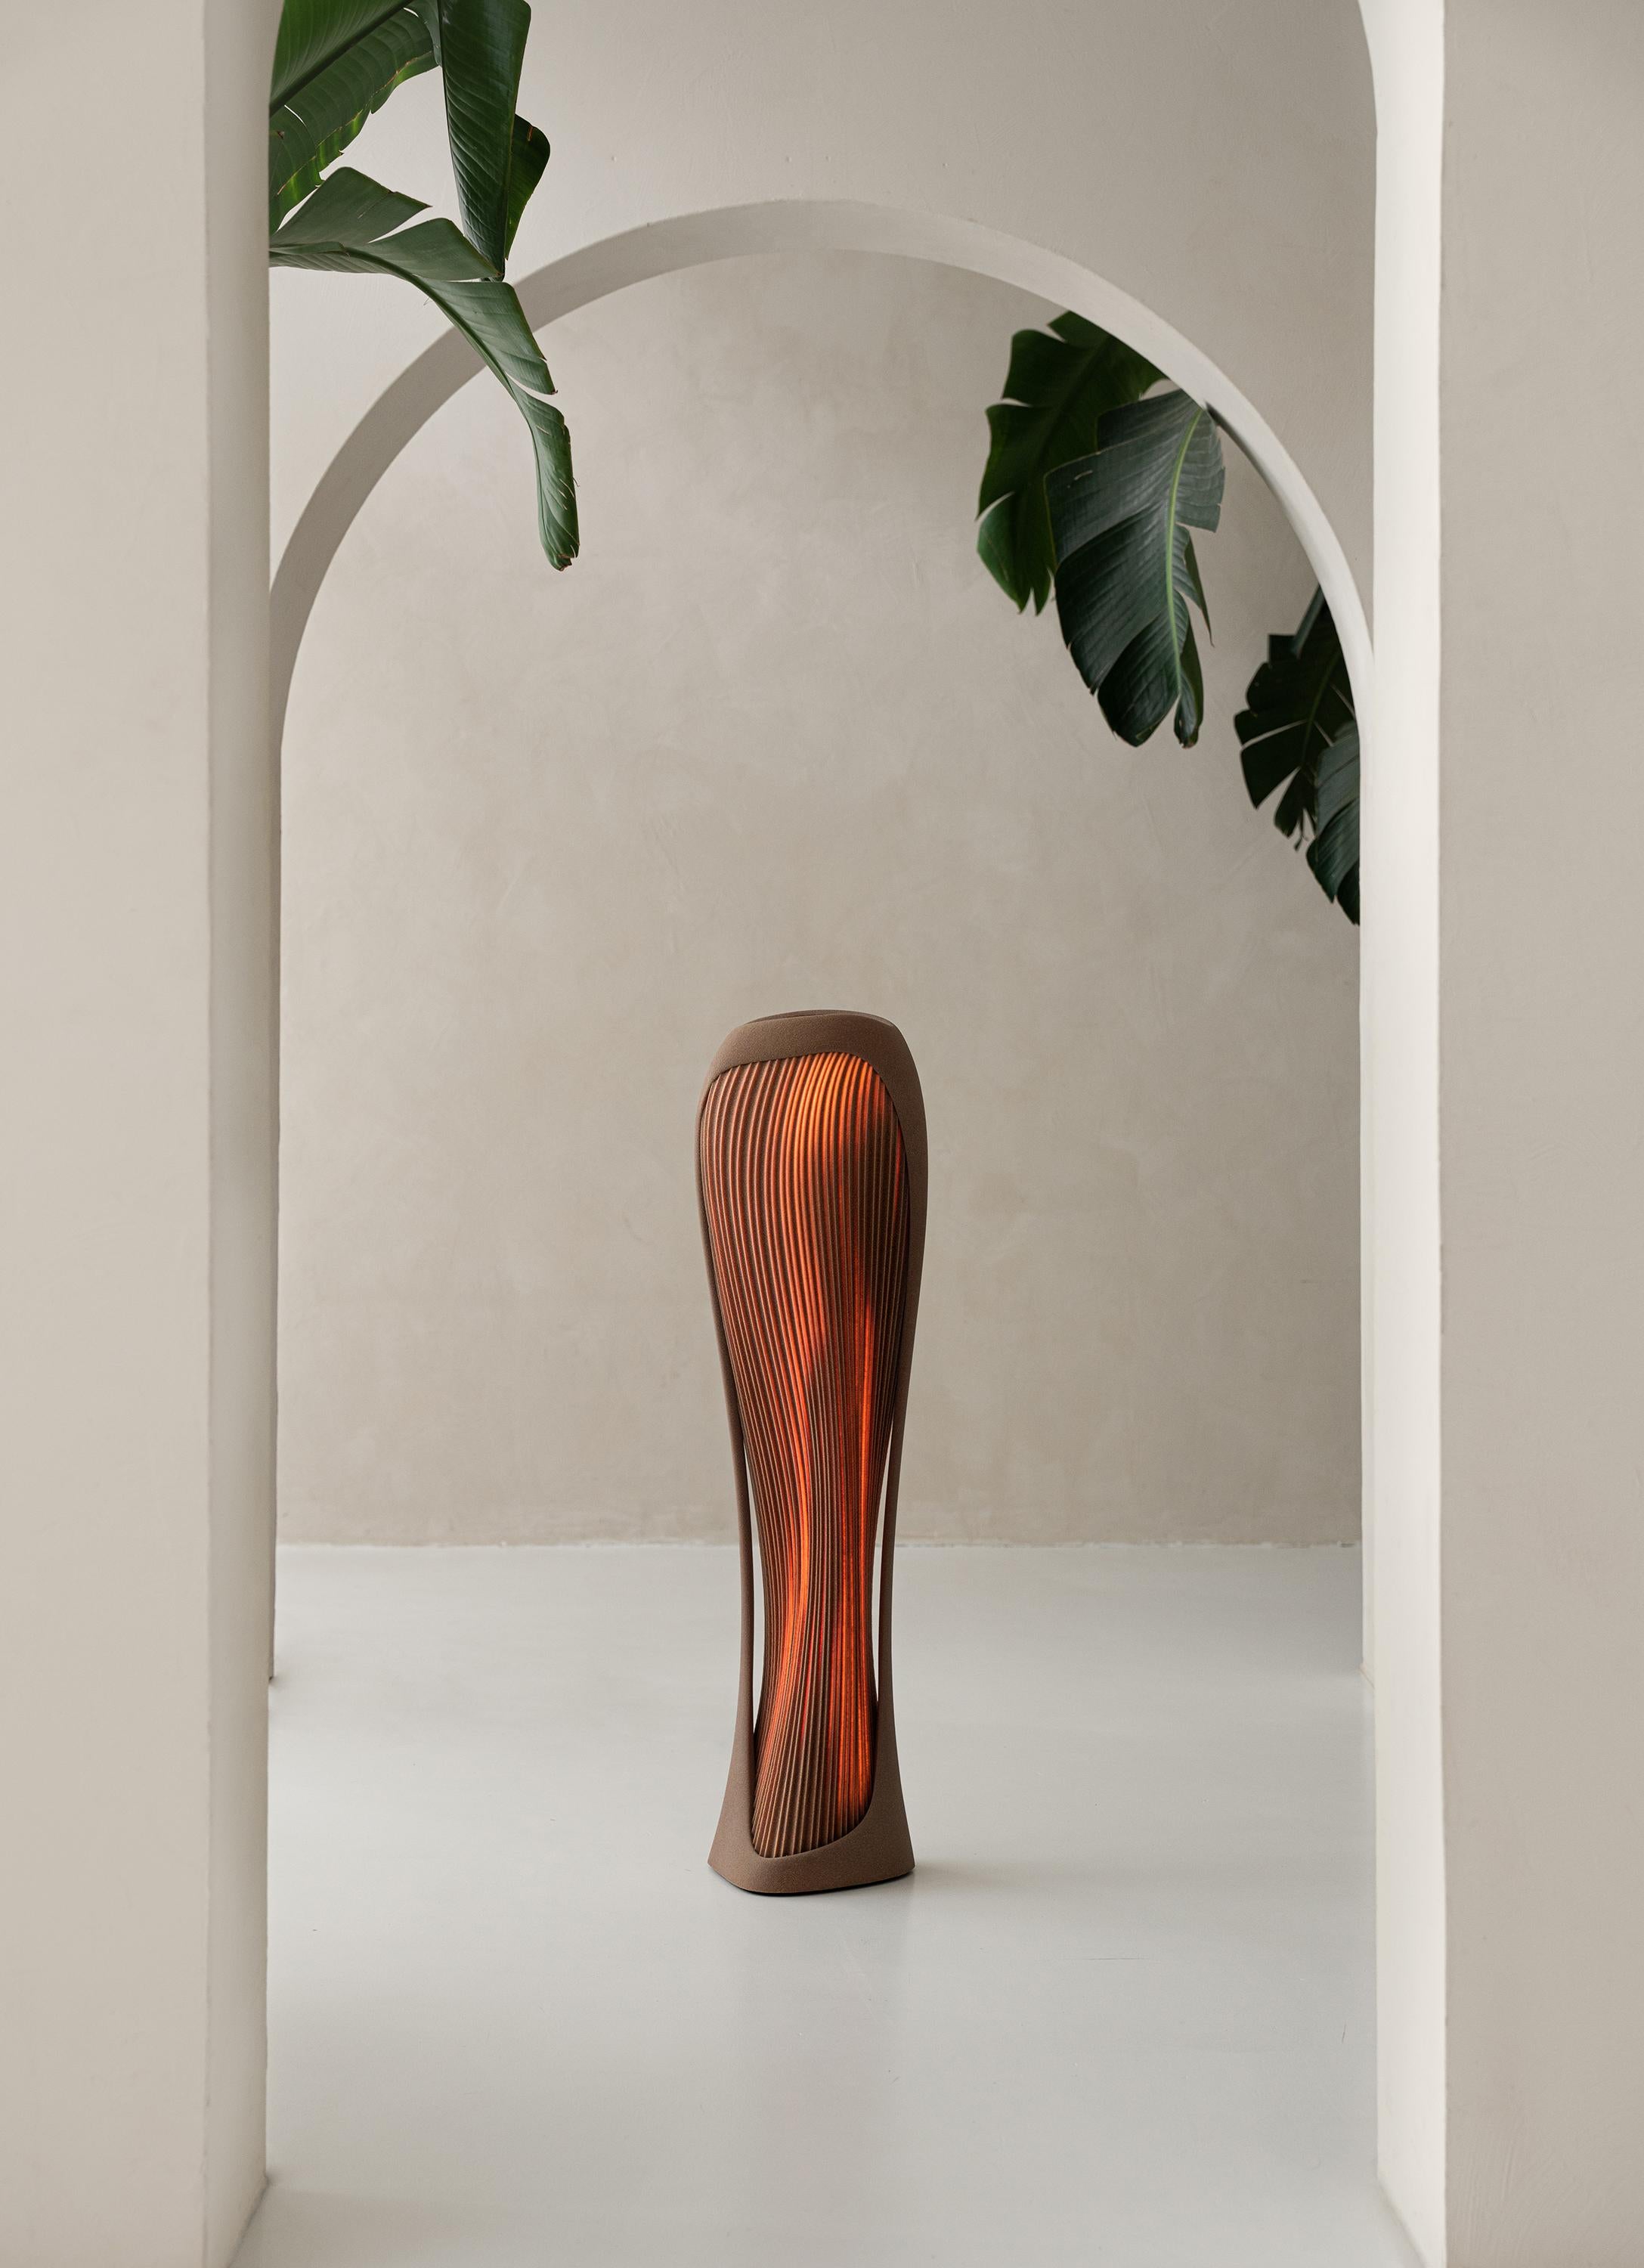 Introducing the Para Dune table lamp, an exquisite piece of functional art that transcends the boundaries of contemporary lighting. Inspired by the hauntingly beautiful formations of desert dunes at dusk, this piece is a fusion of organic form and